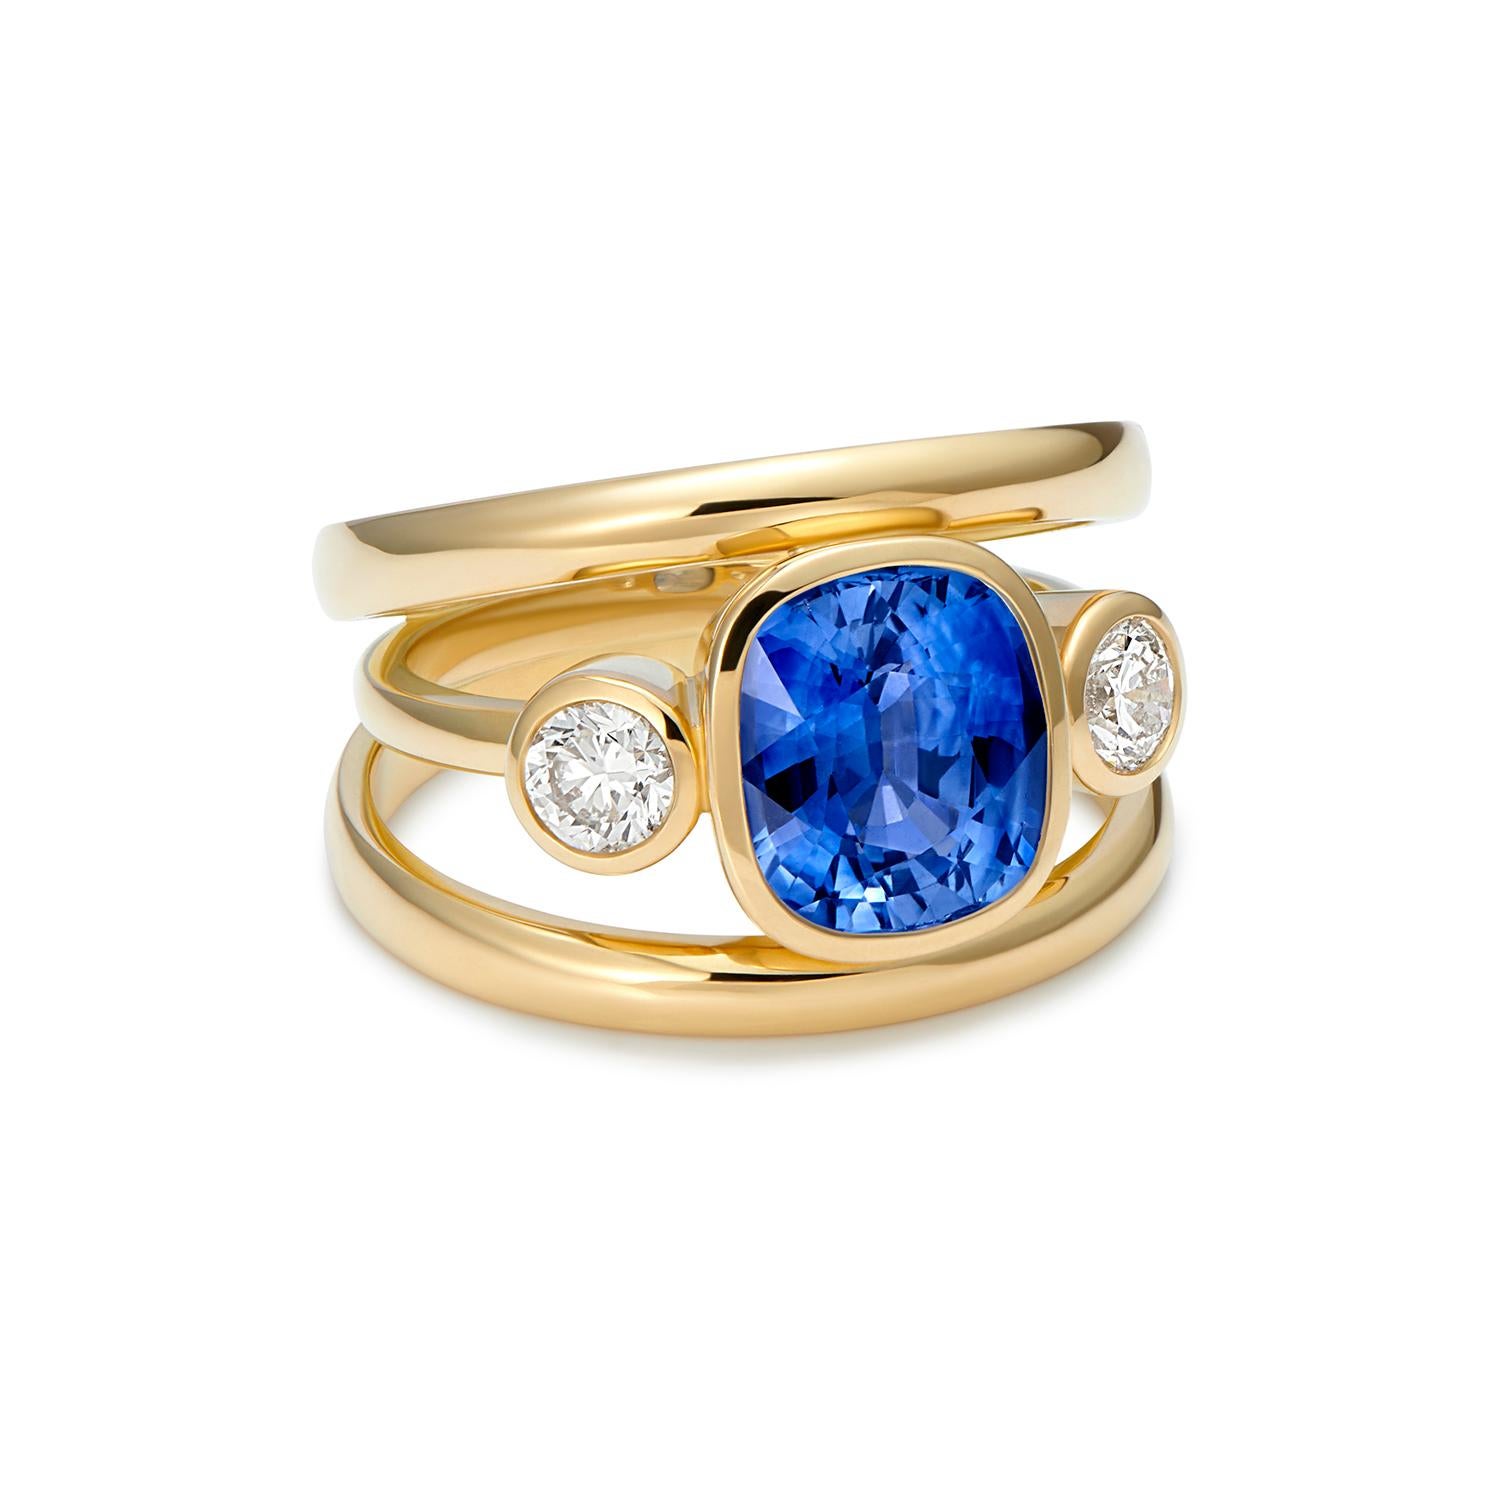 4.37ct Blue Sapphire 
0.65ct Diamonds 

A gorgeous Sri Lankan 4.37ct sapphire, cornflower blue and diamond ring 3 stone ring, set in 18kt yellow gold, hand made in England by exceptionally talented goldsmiths. 

We continue to make new pieces of